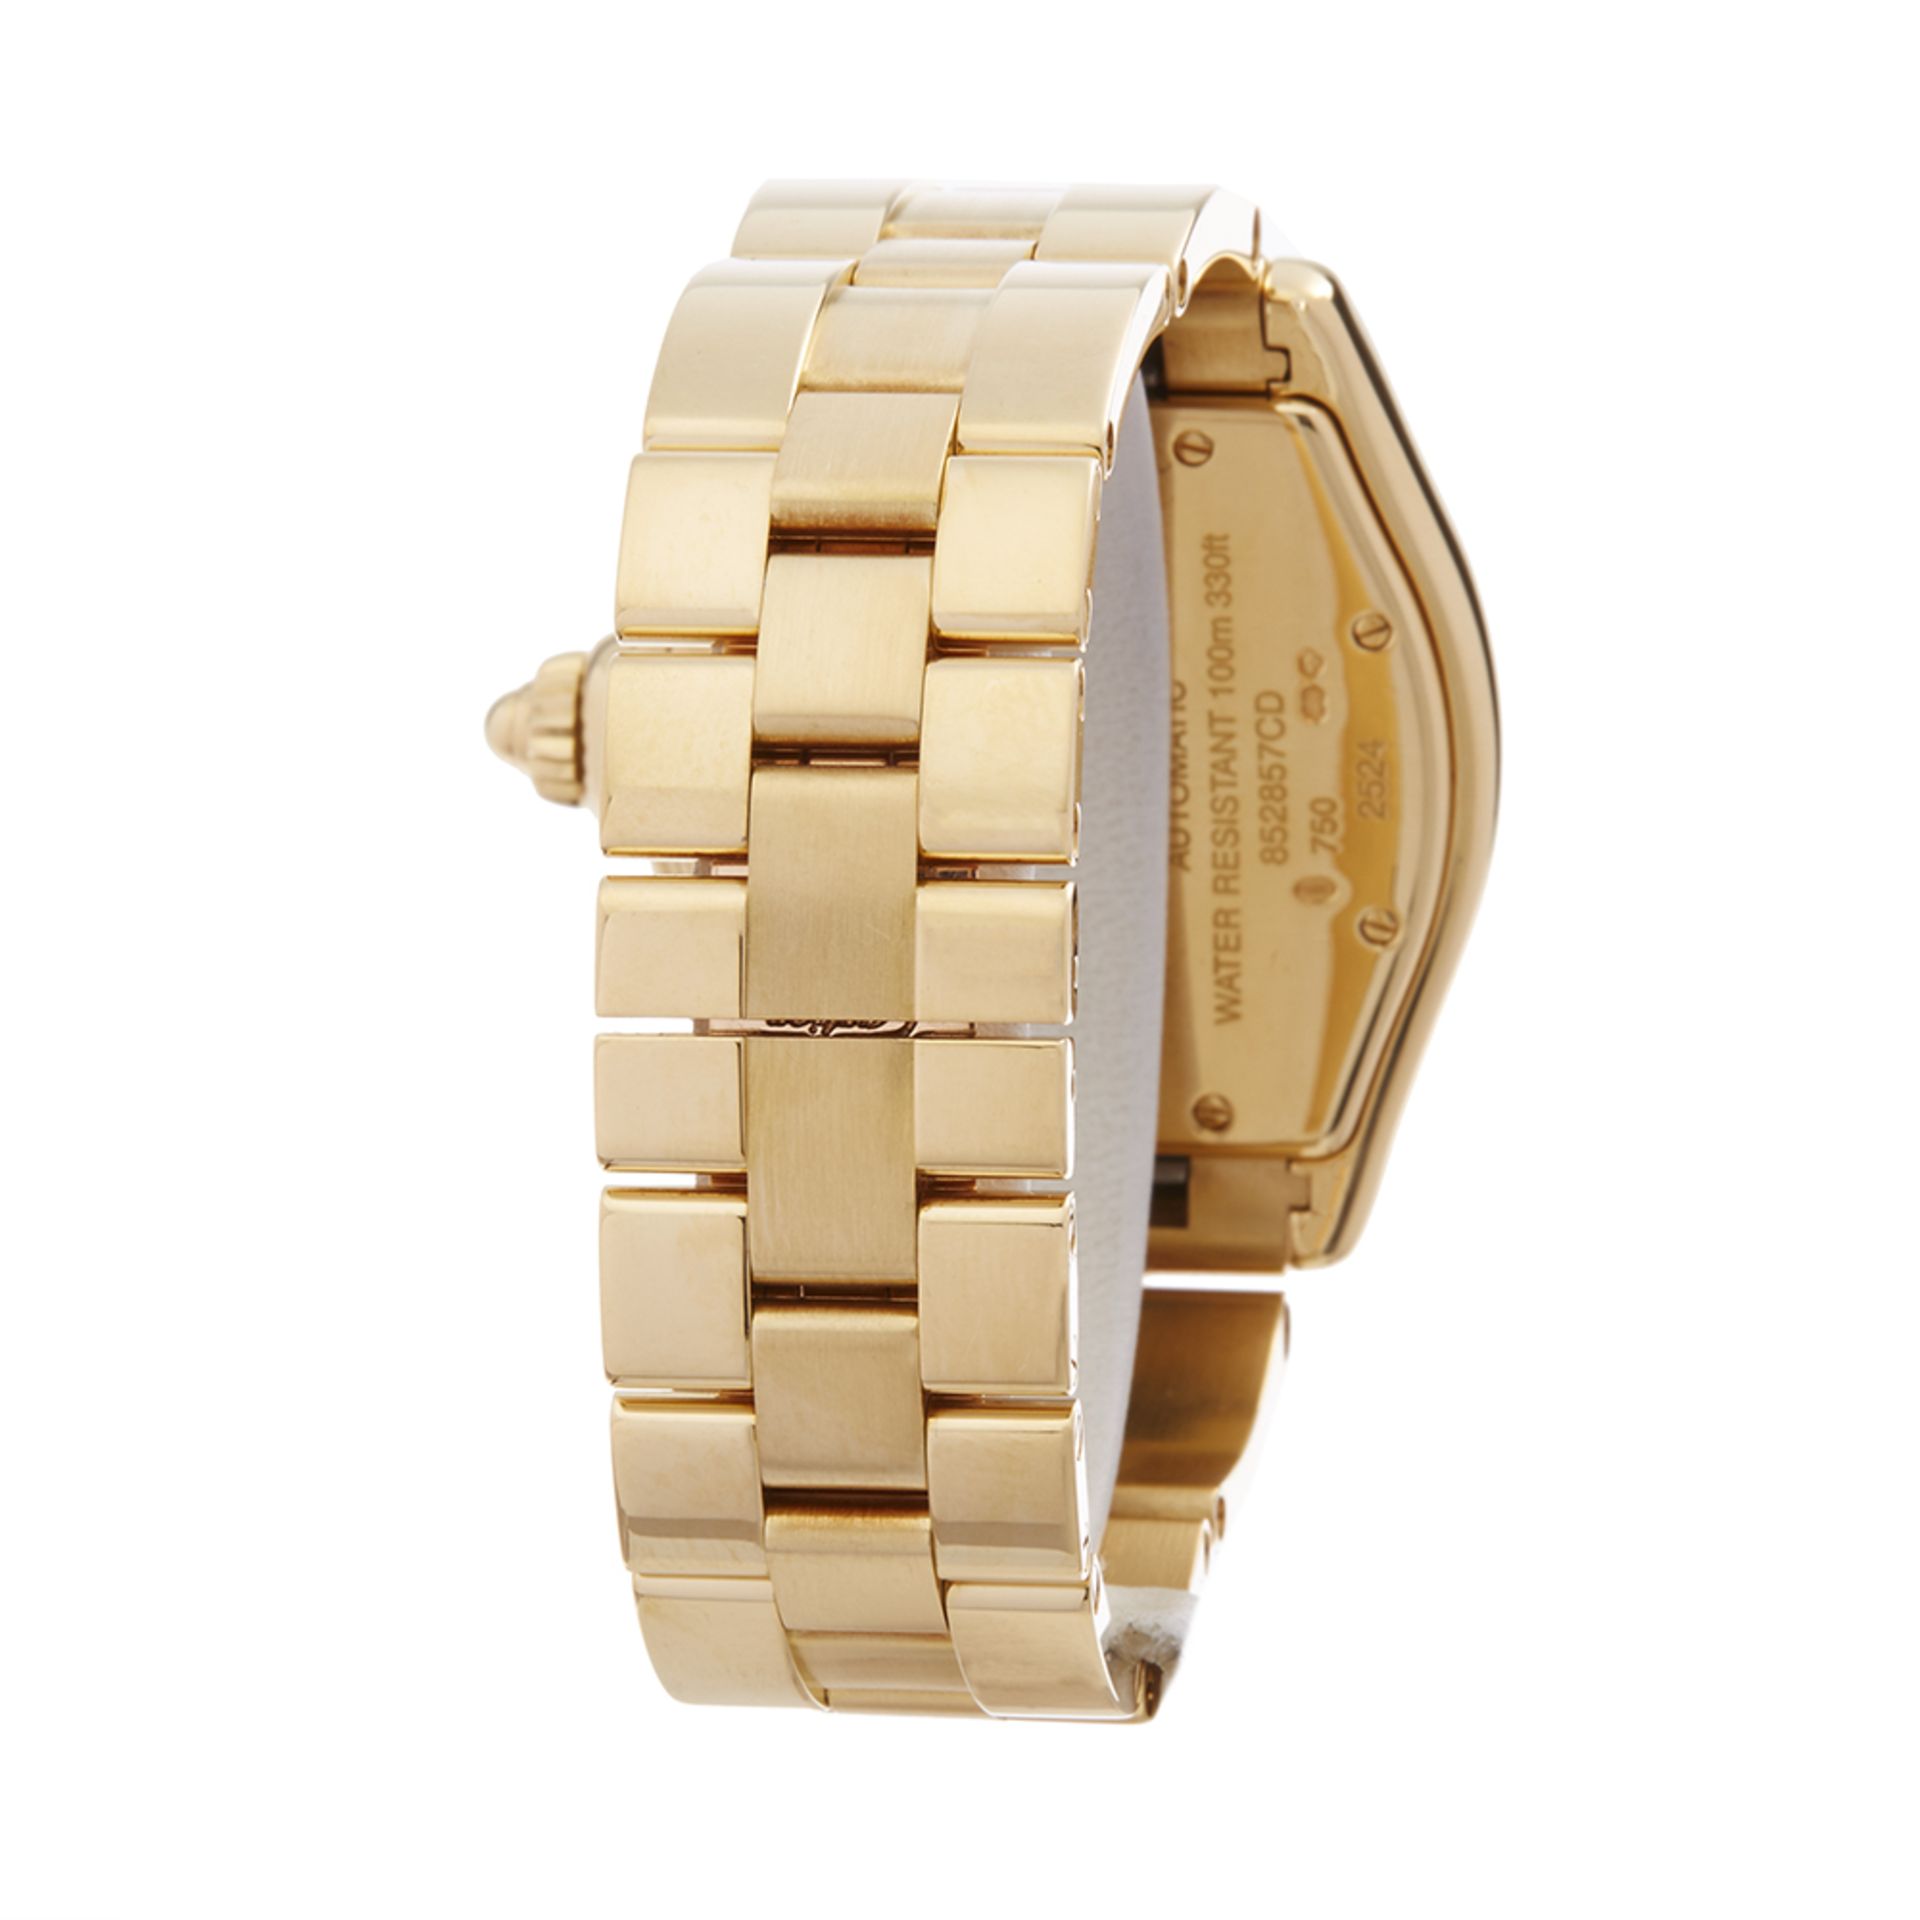 Cartier Roadster 18K Yellow Gold - 2524 or W620005V2 - Image 5 of 7